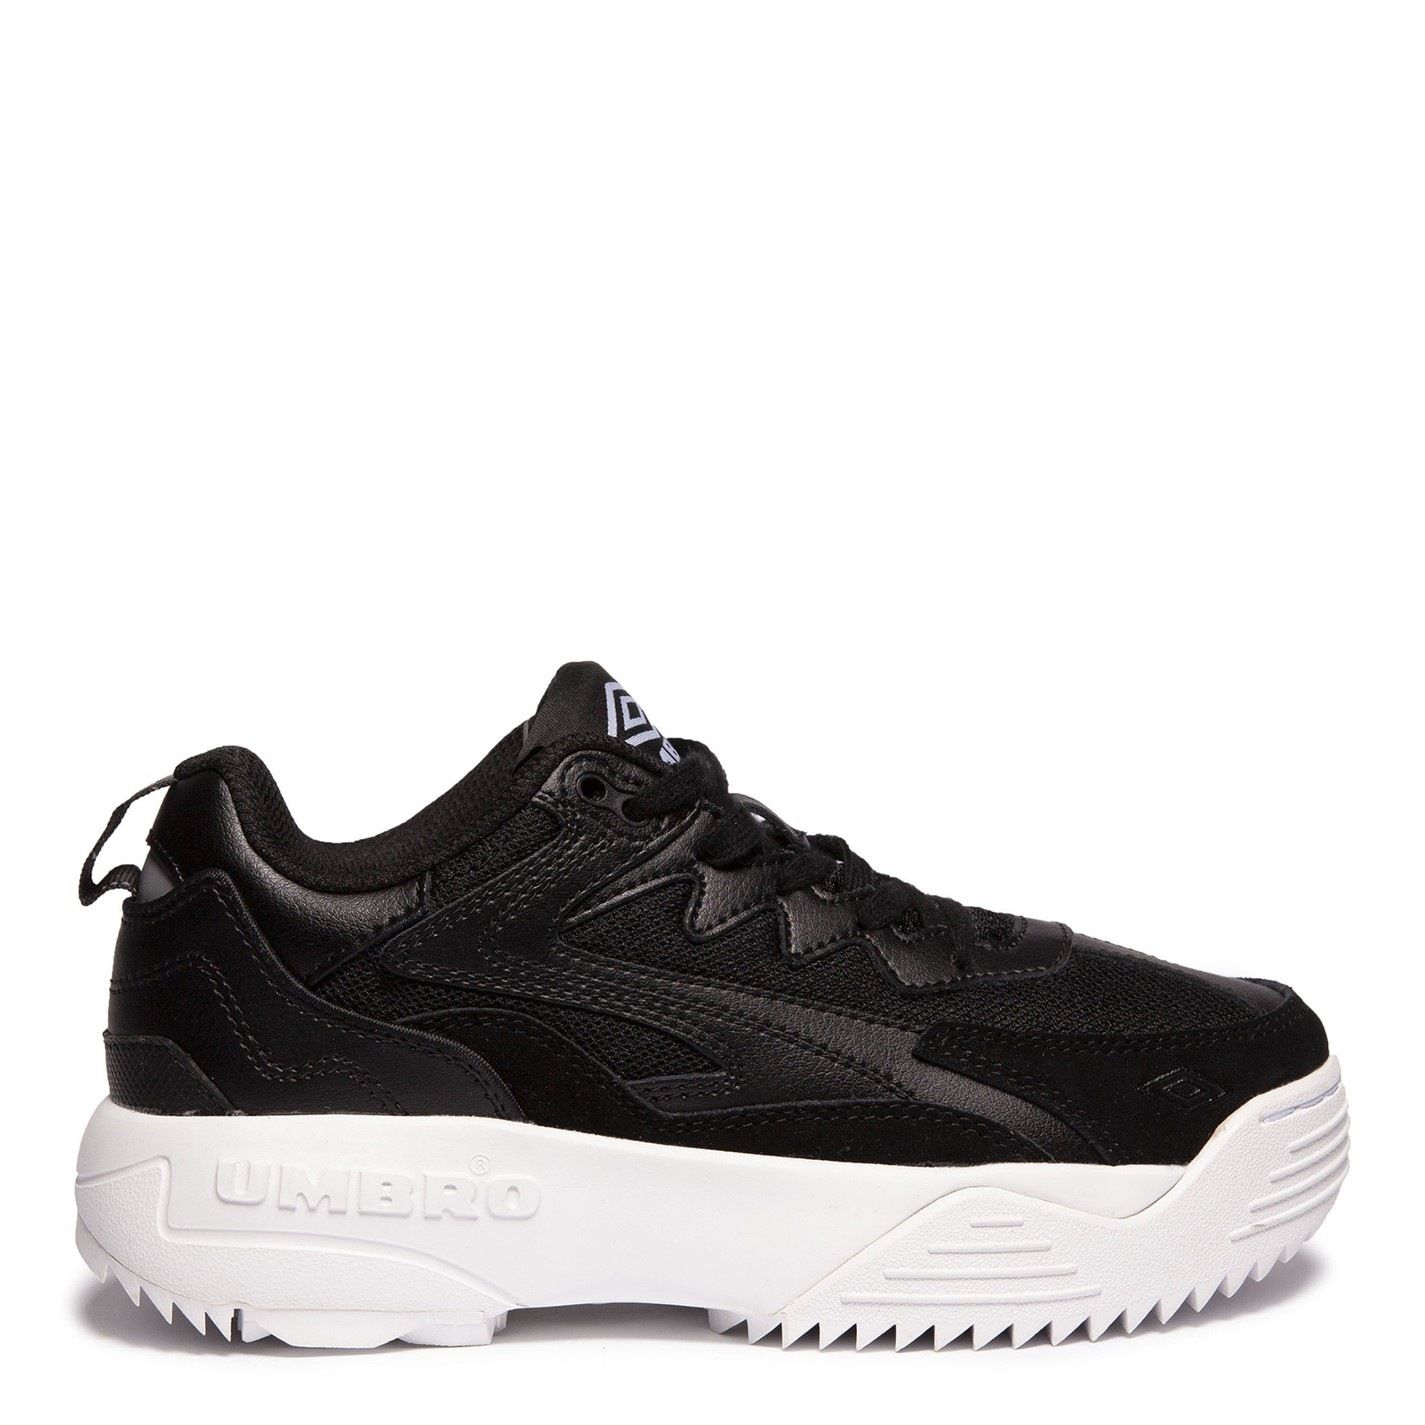 Men's Exert Max Low Top Leather & Suede Trainers